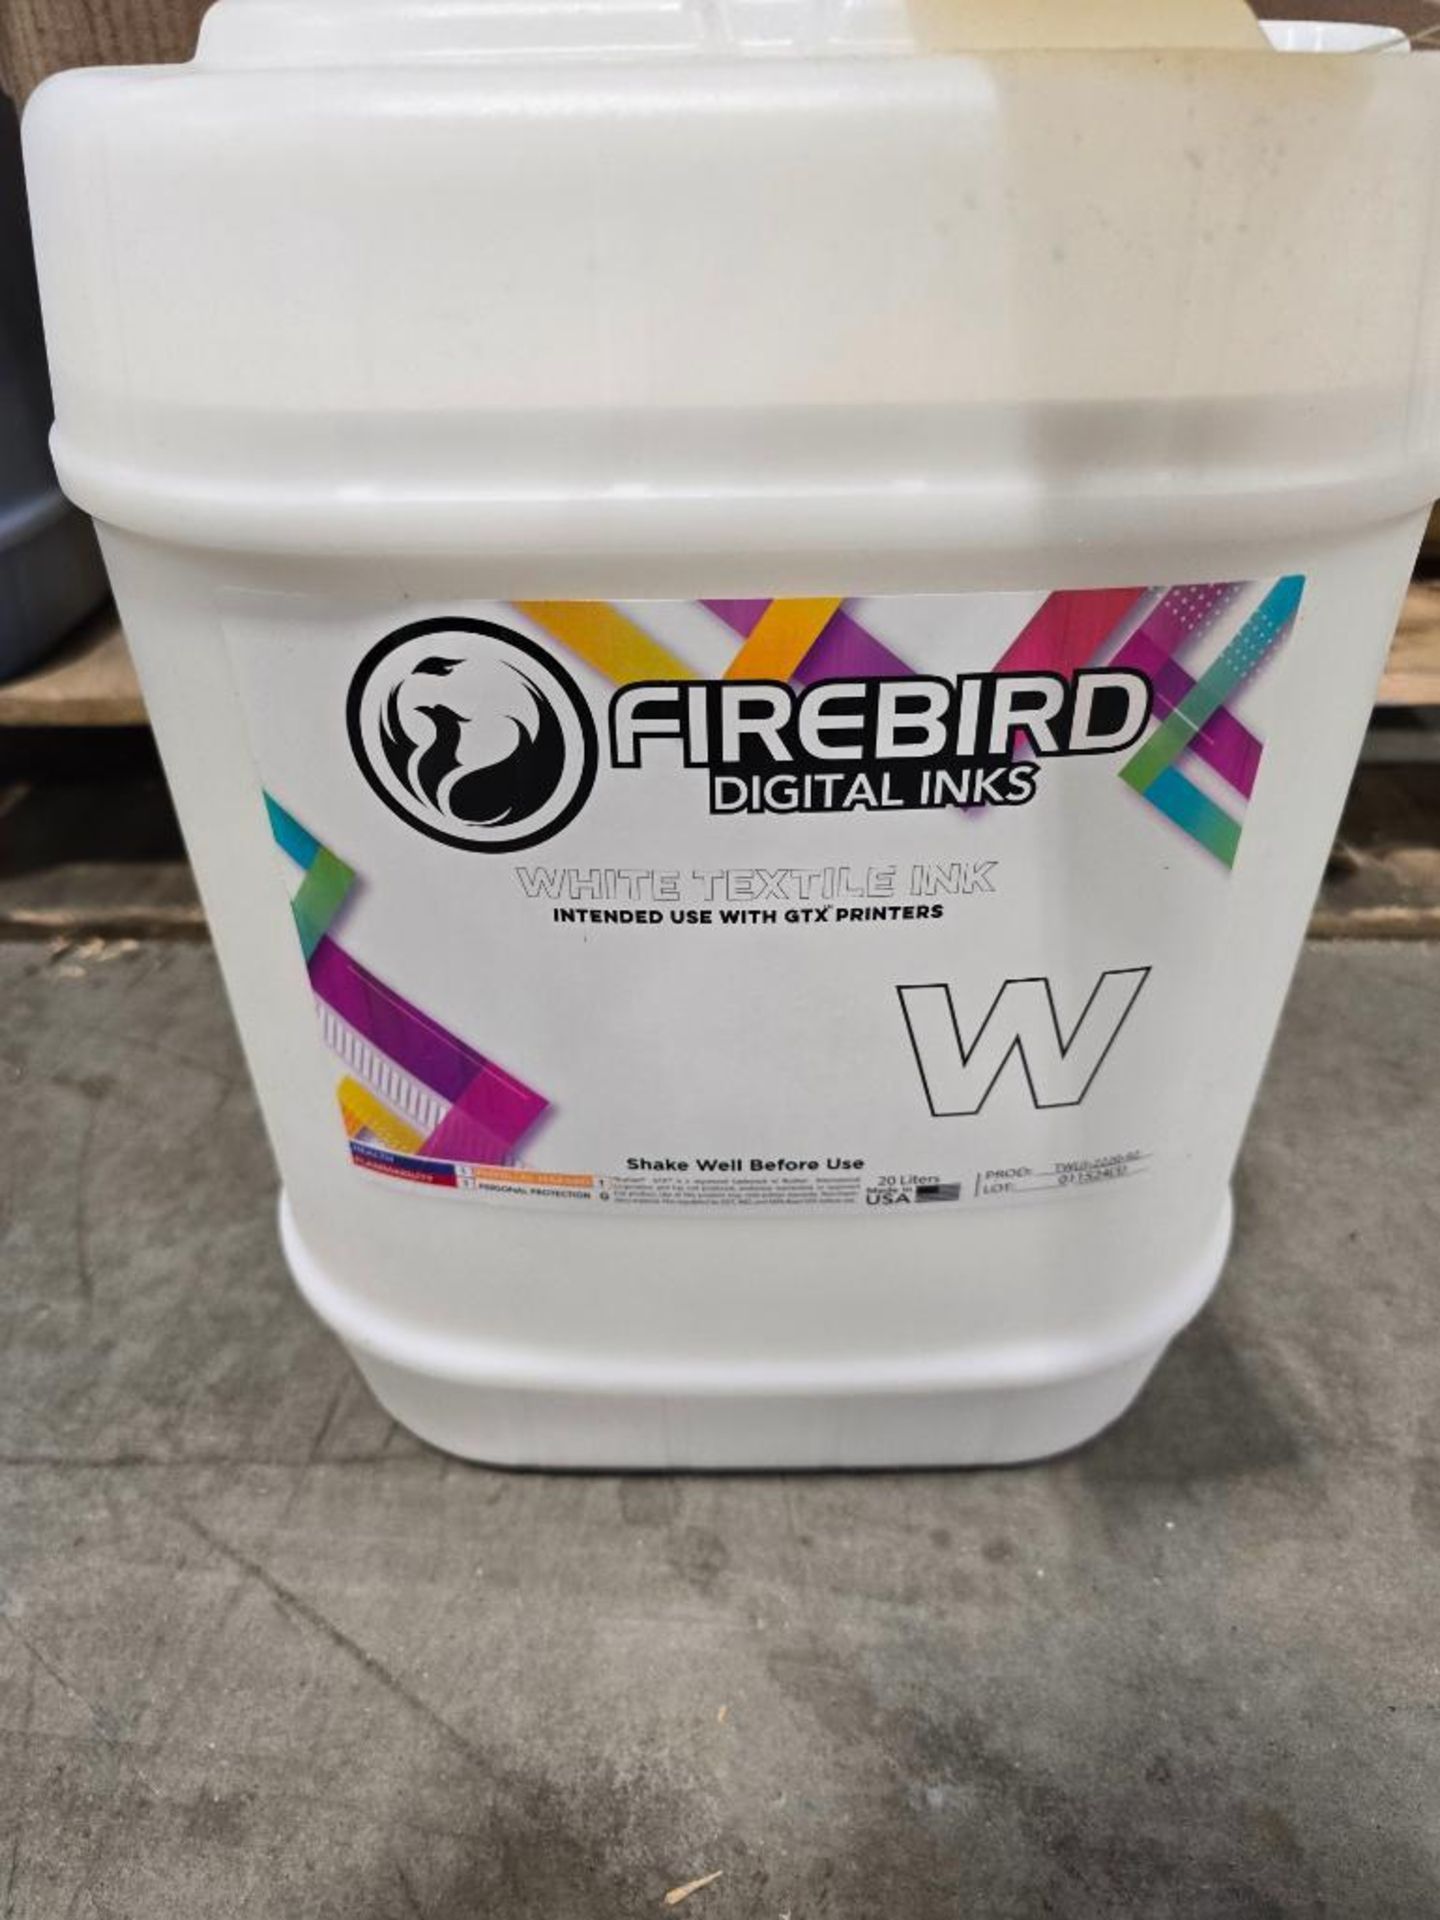 Firebird White Textile Ink, 20-Liter Container, Product: TW(J)-2220-92 - Image 2 of 2